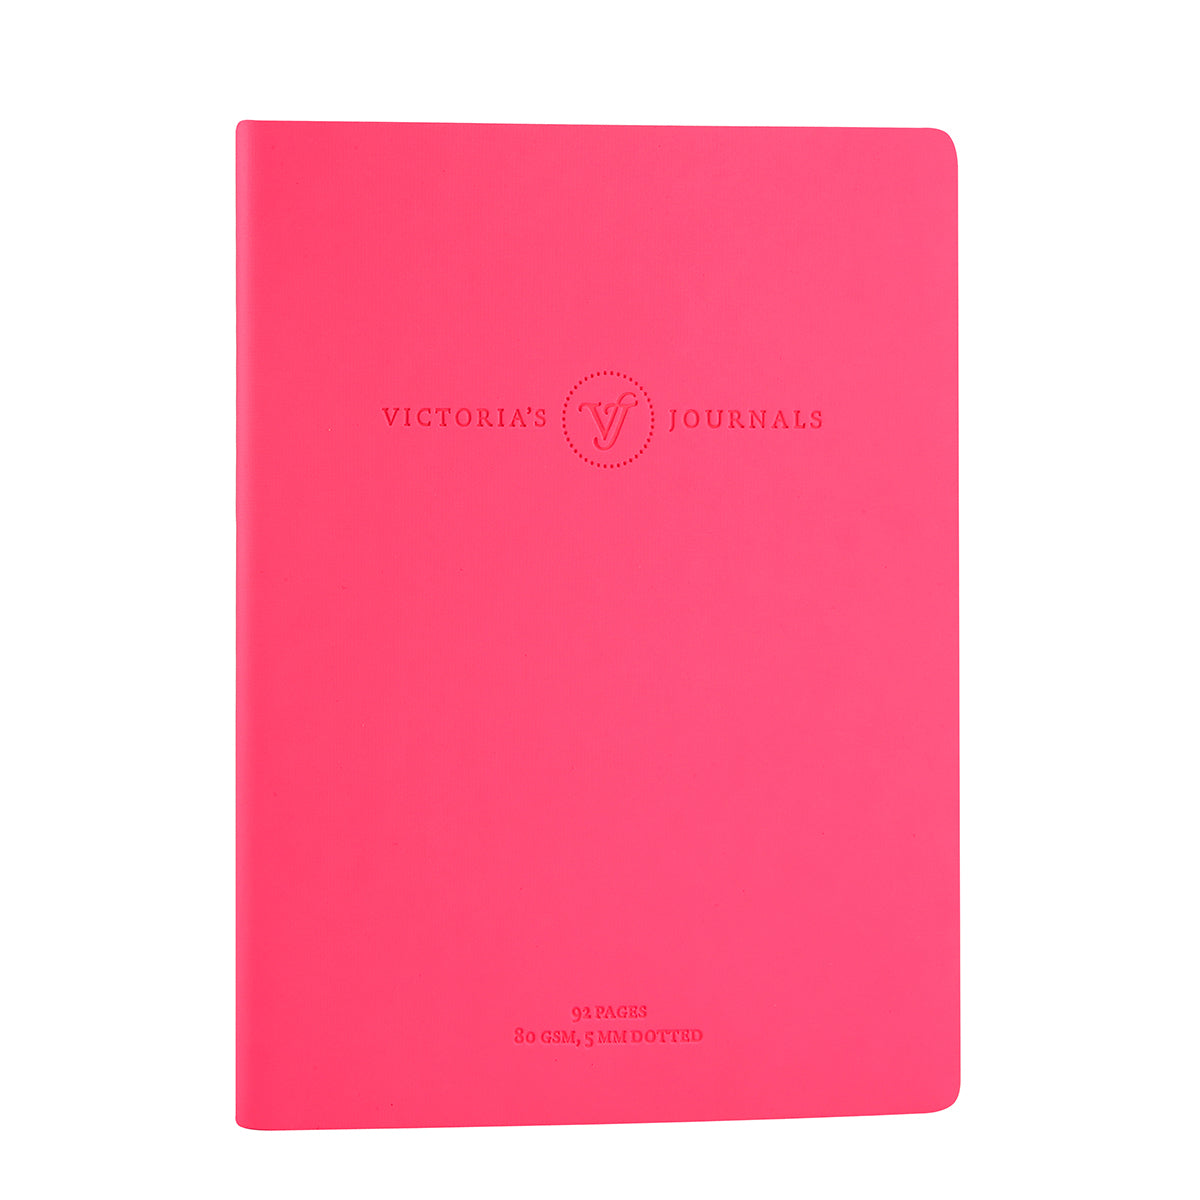 Victoria's Journals Neon Dotted Bullet Journal, Flexy Leatherette Cover, 96pages, 80 gsm (Neon Pink)